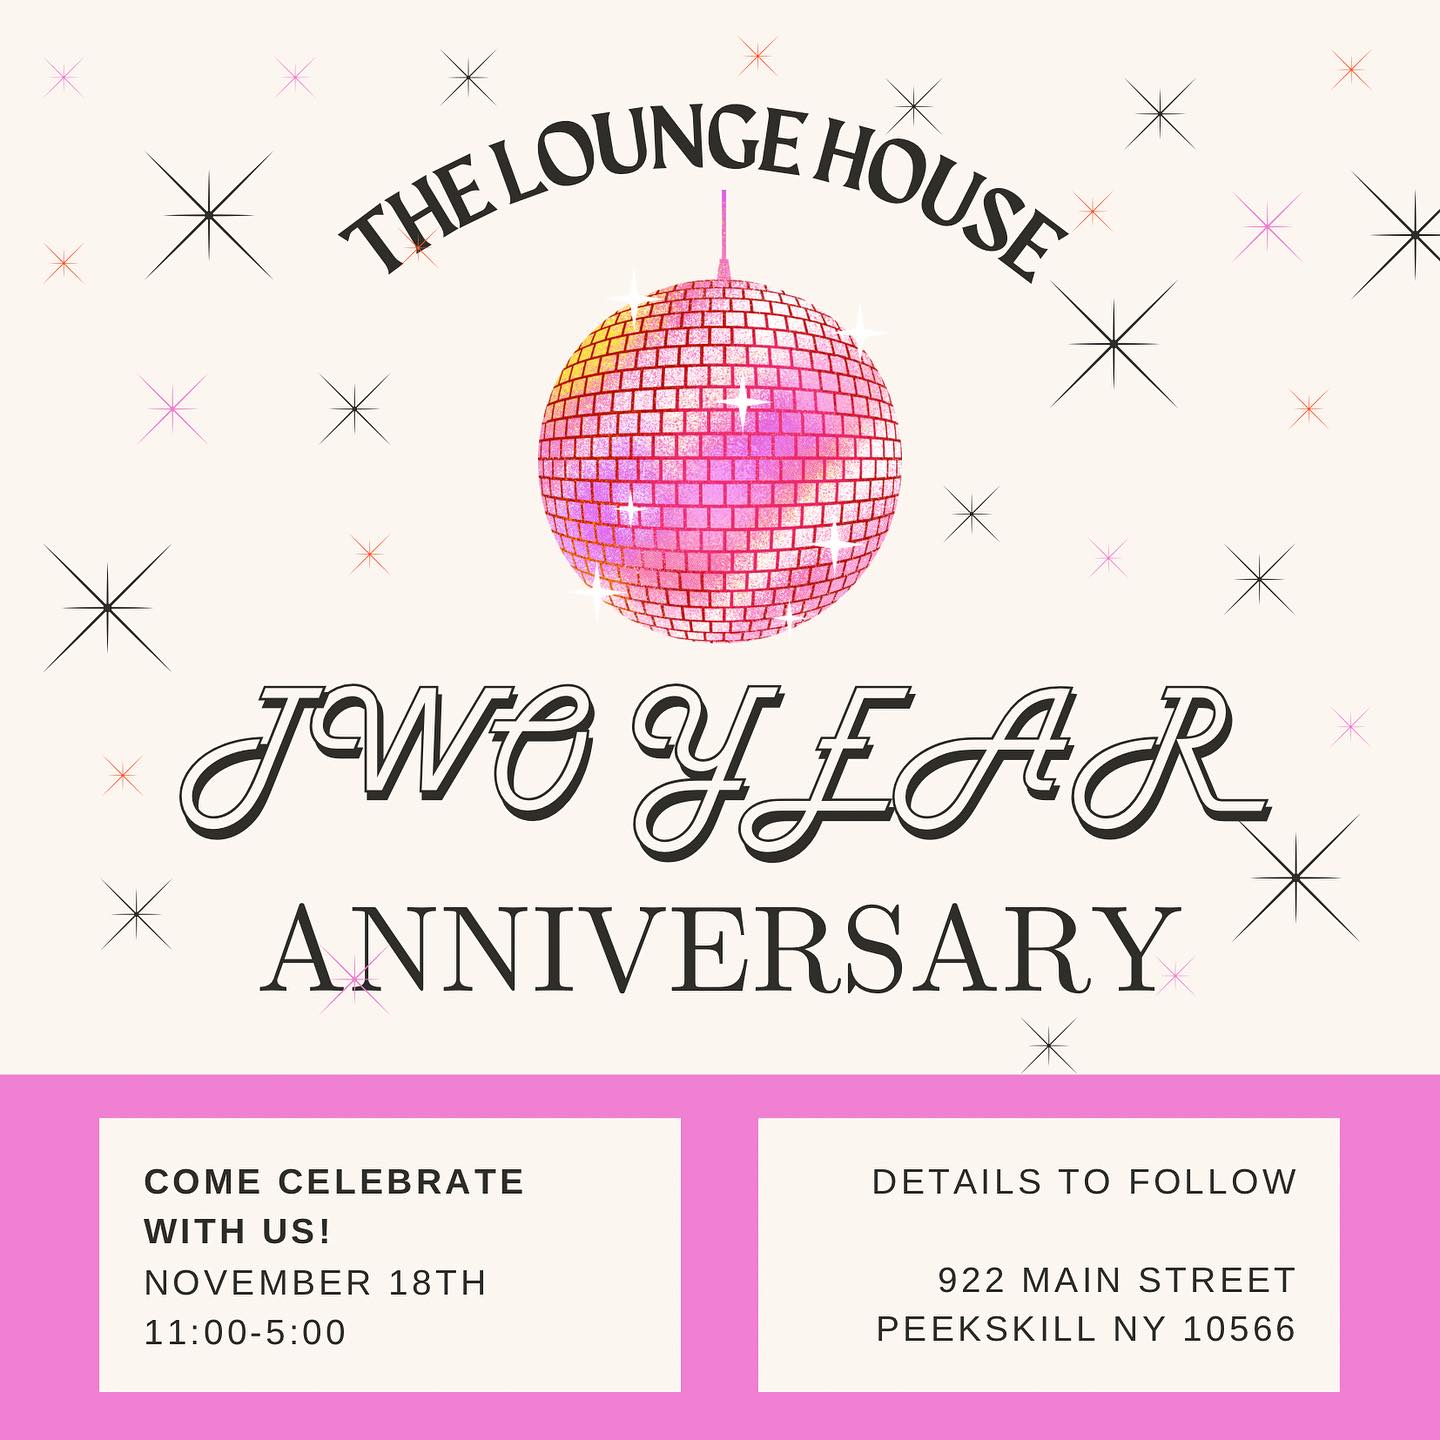 Flier for The Lounge House Two Year Anniversary